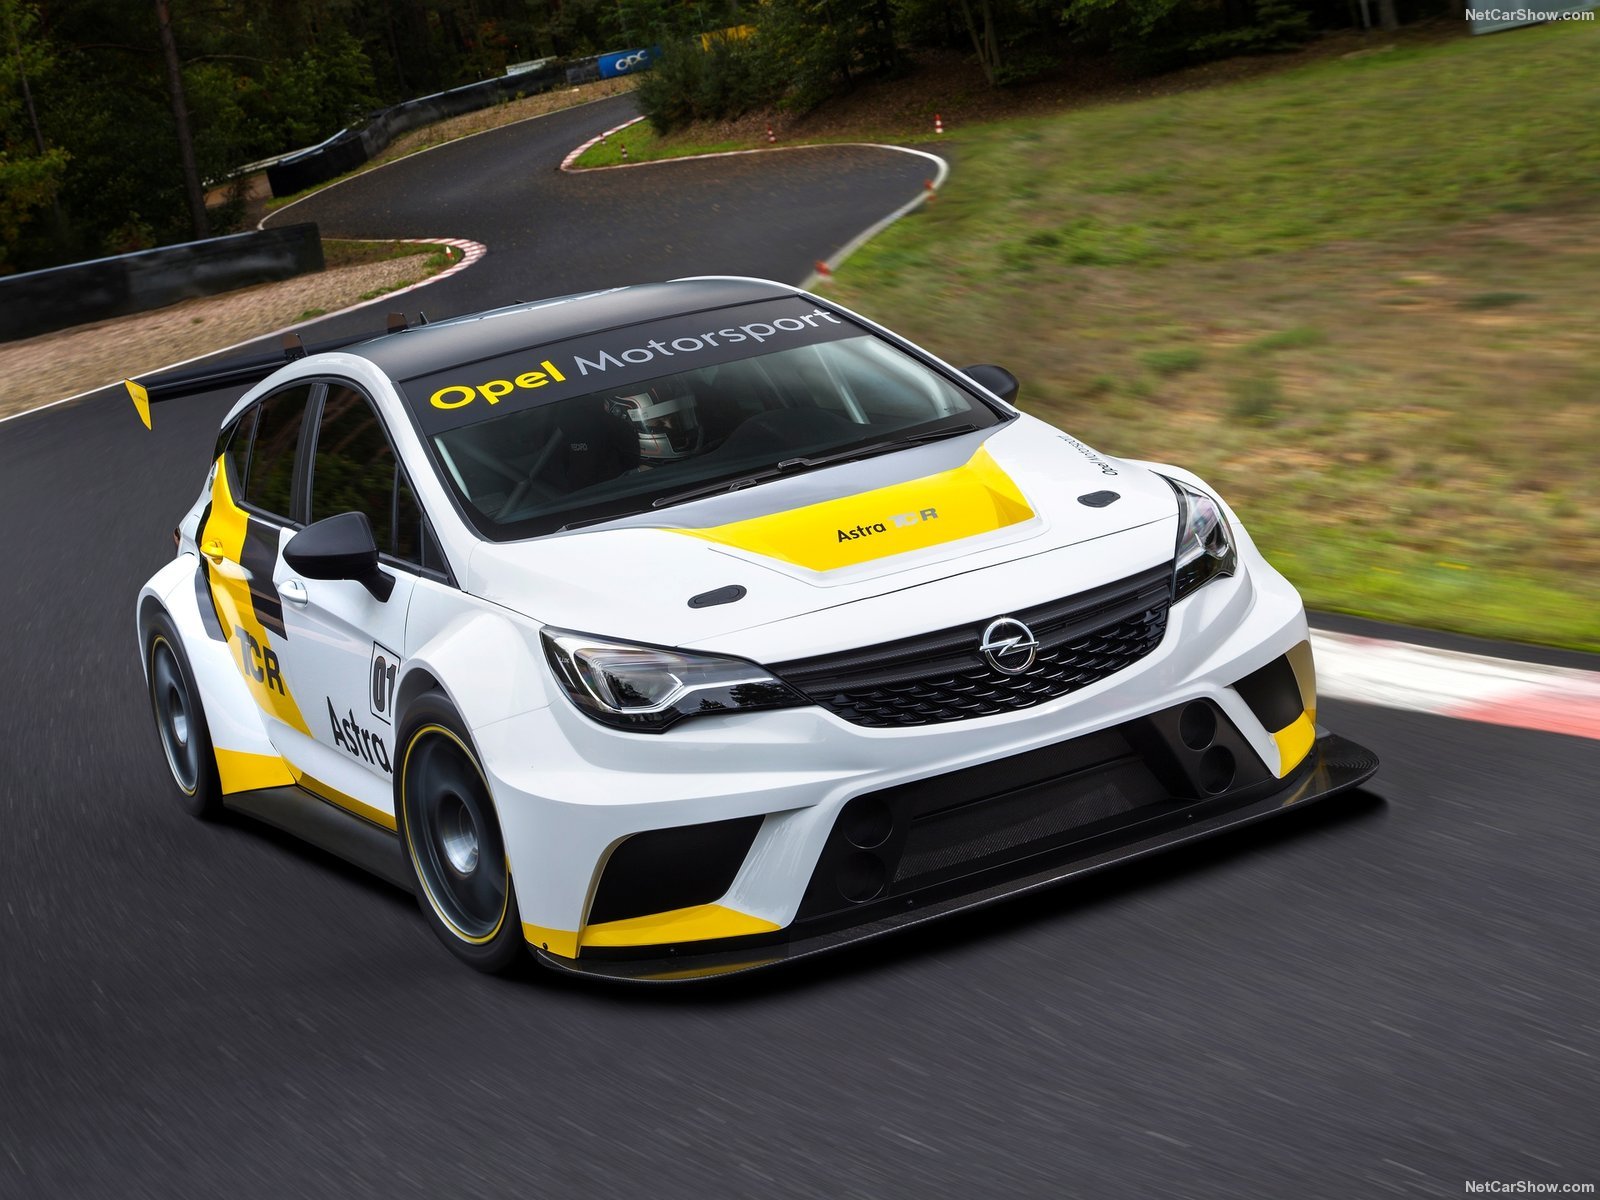 opel, Astra, Tcr, Cars, Racecars, 2016 Wallpaper